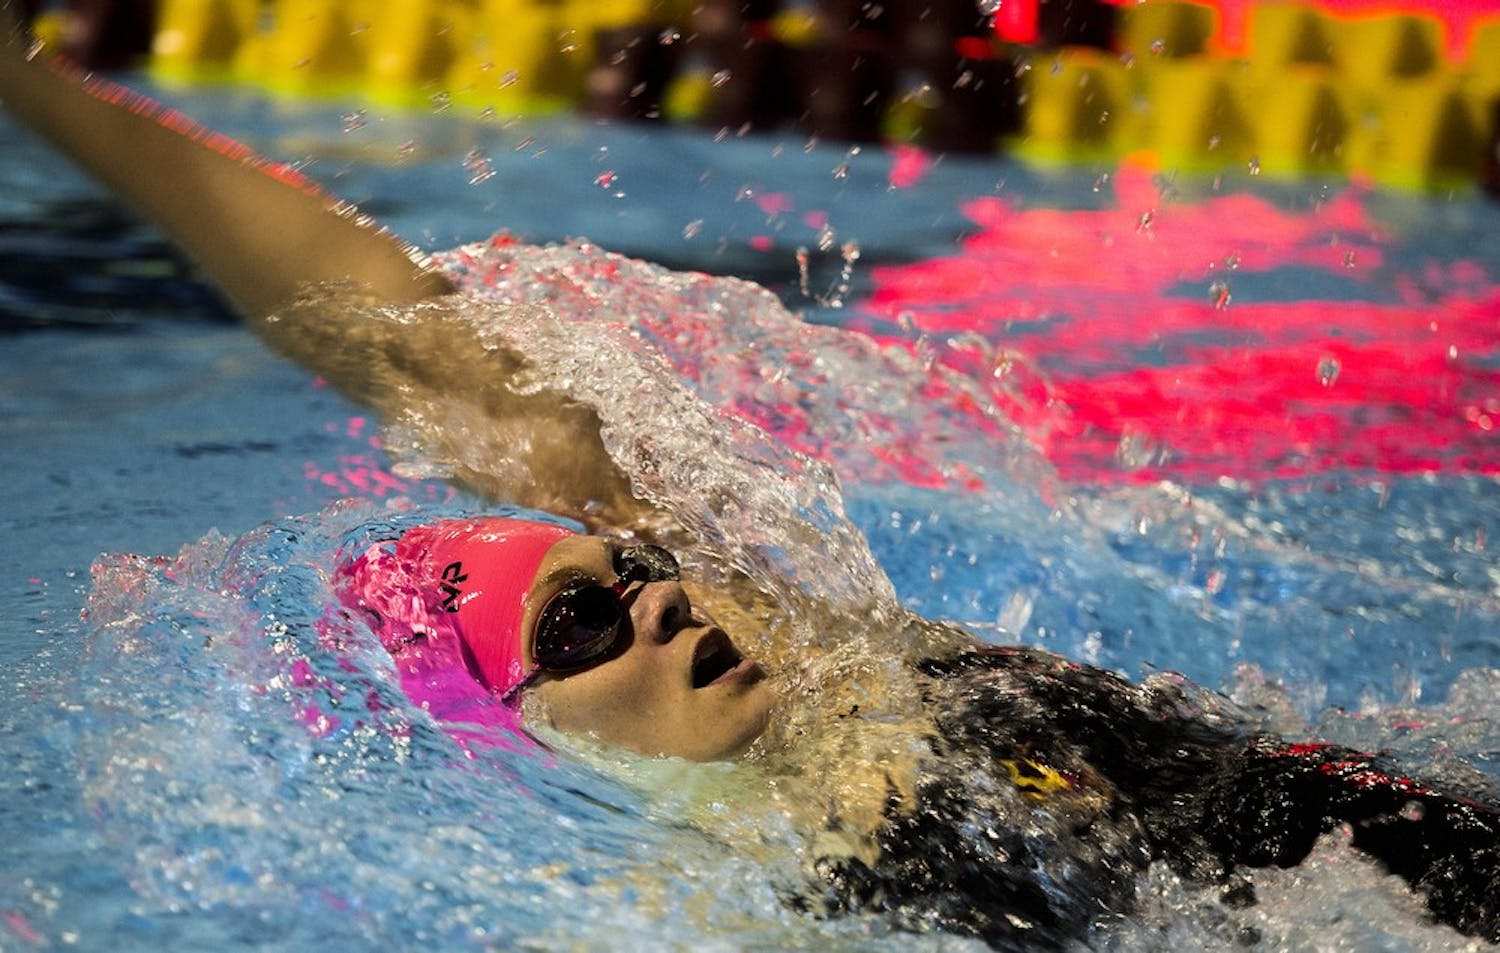 Kallyn Barkey swims the 200 individual medley at the ASU women's swimming meet on Thursday, Oct. 22, 2015, at the Mona Plummer Aquatic Complex in Tempe, Ariz. The Sun Devils lost the meet to the Washington State Cougars, 115-90. 